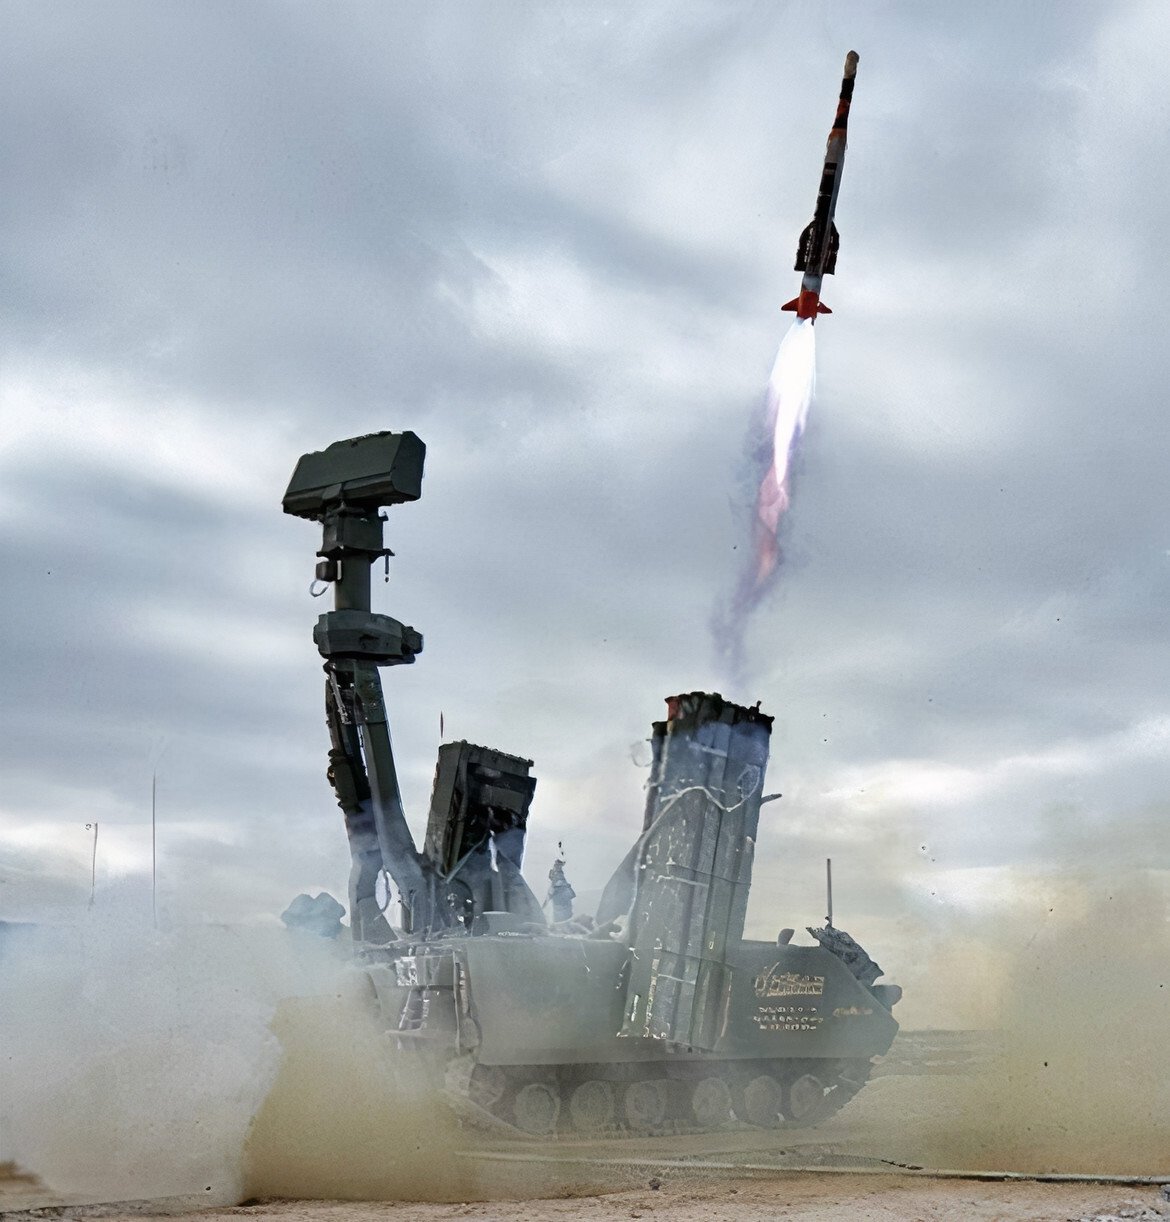 A Hisar-A+ missile is seen after launching from an autonomous missile launching system, Aksaray, central Turkey, May 3, 2021. (Courtesy of the Ministry of National Defense)